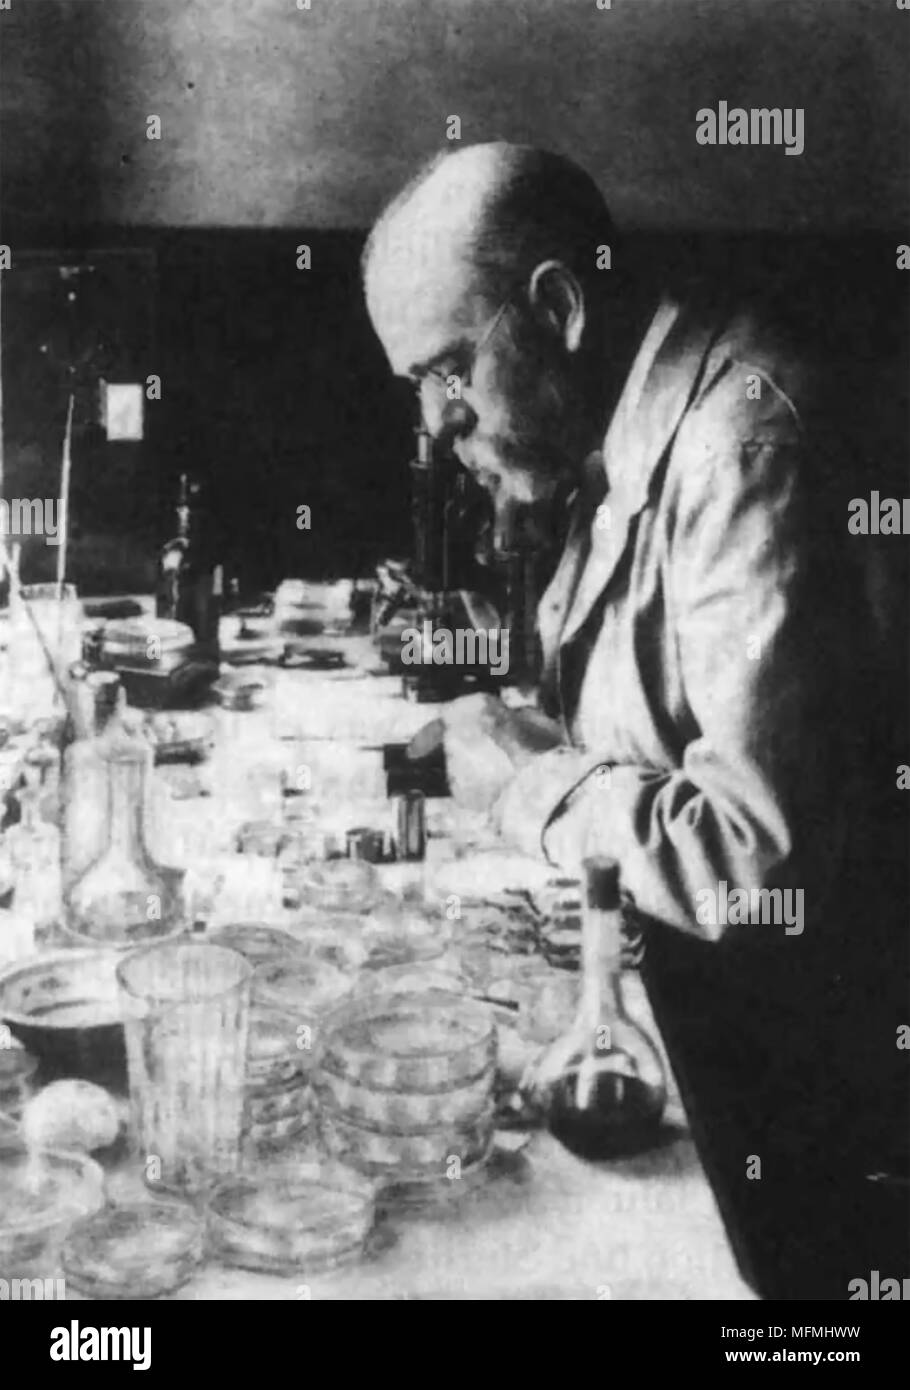 ROBERT KOCH (1843-1910) German physician and microbiologist about 1907 when he received the Nobel Prize in Medicine. Stock Photo